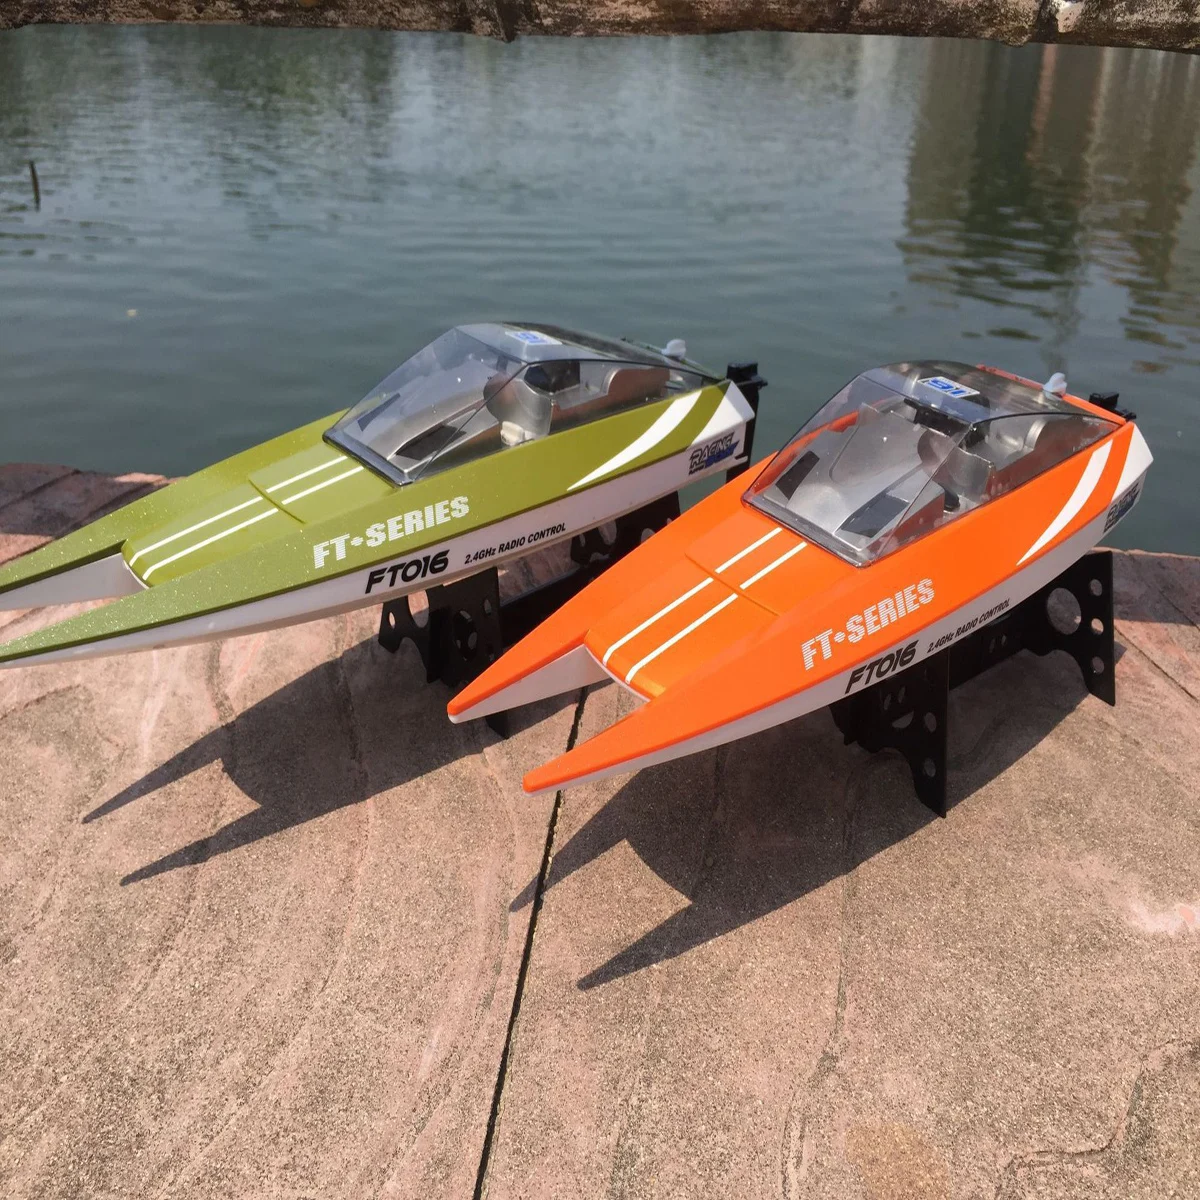 Remote Control Boat High Speed Speed Boat Model Toy Boat Water Cooled Speed Boat 2.4G Remote Control Boat Outdoor Children's Toy